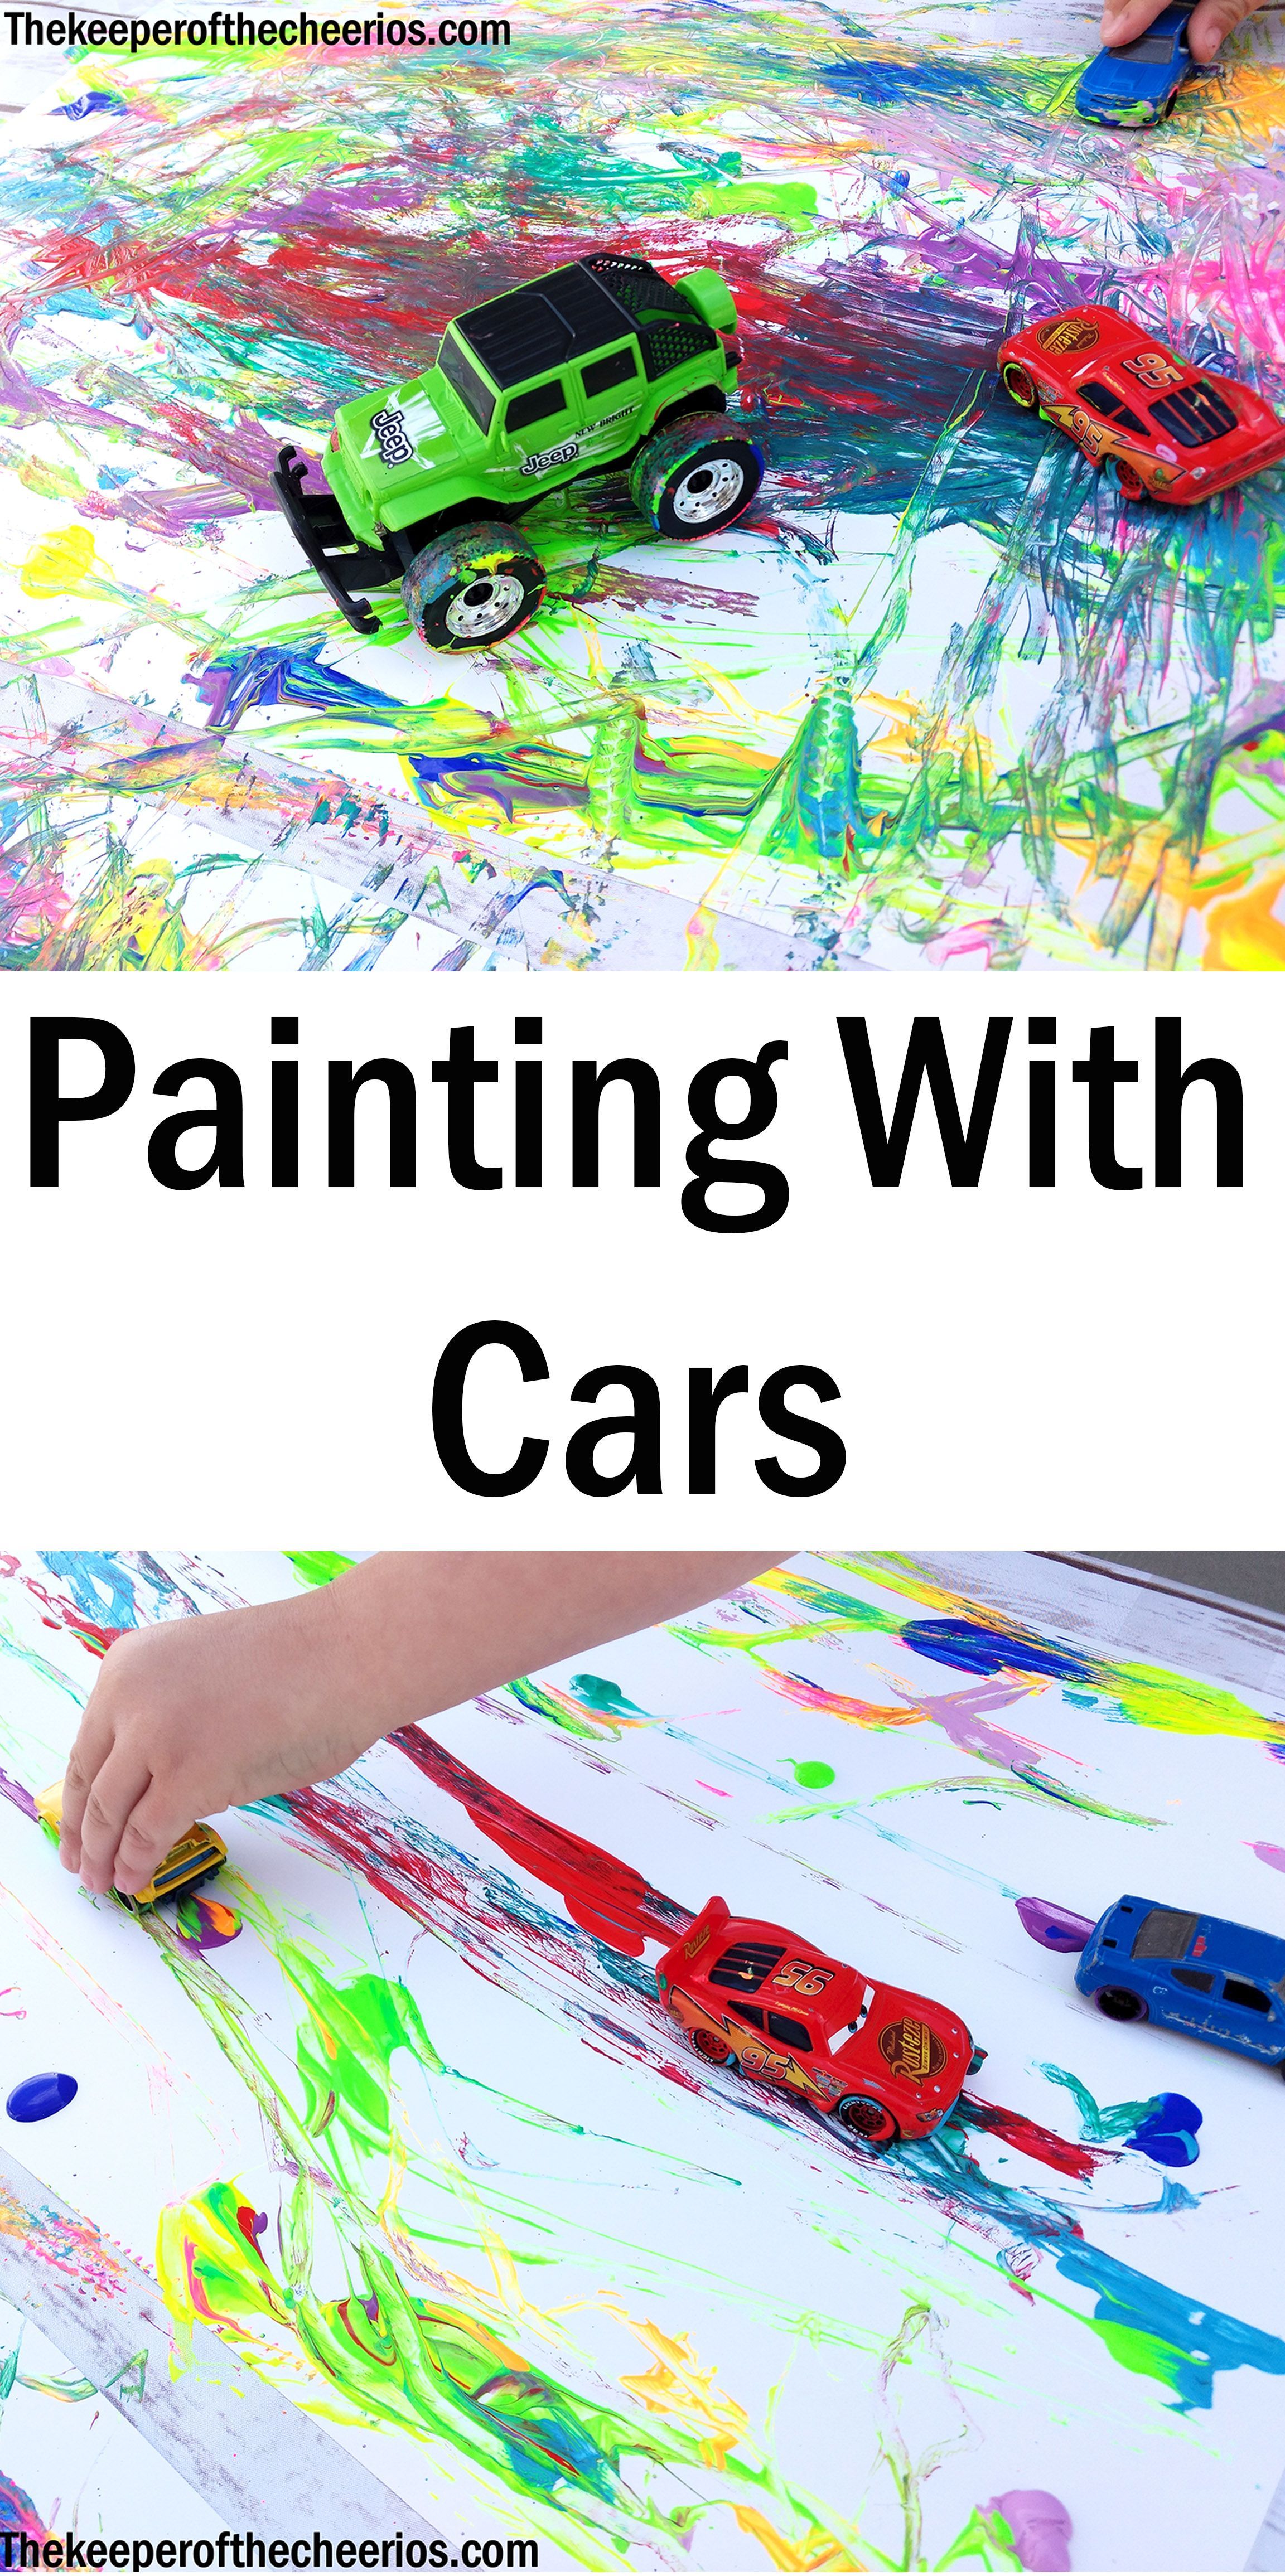 Painting With Cars -   21 kids crafts for toddlers
 ideas